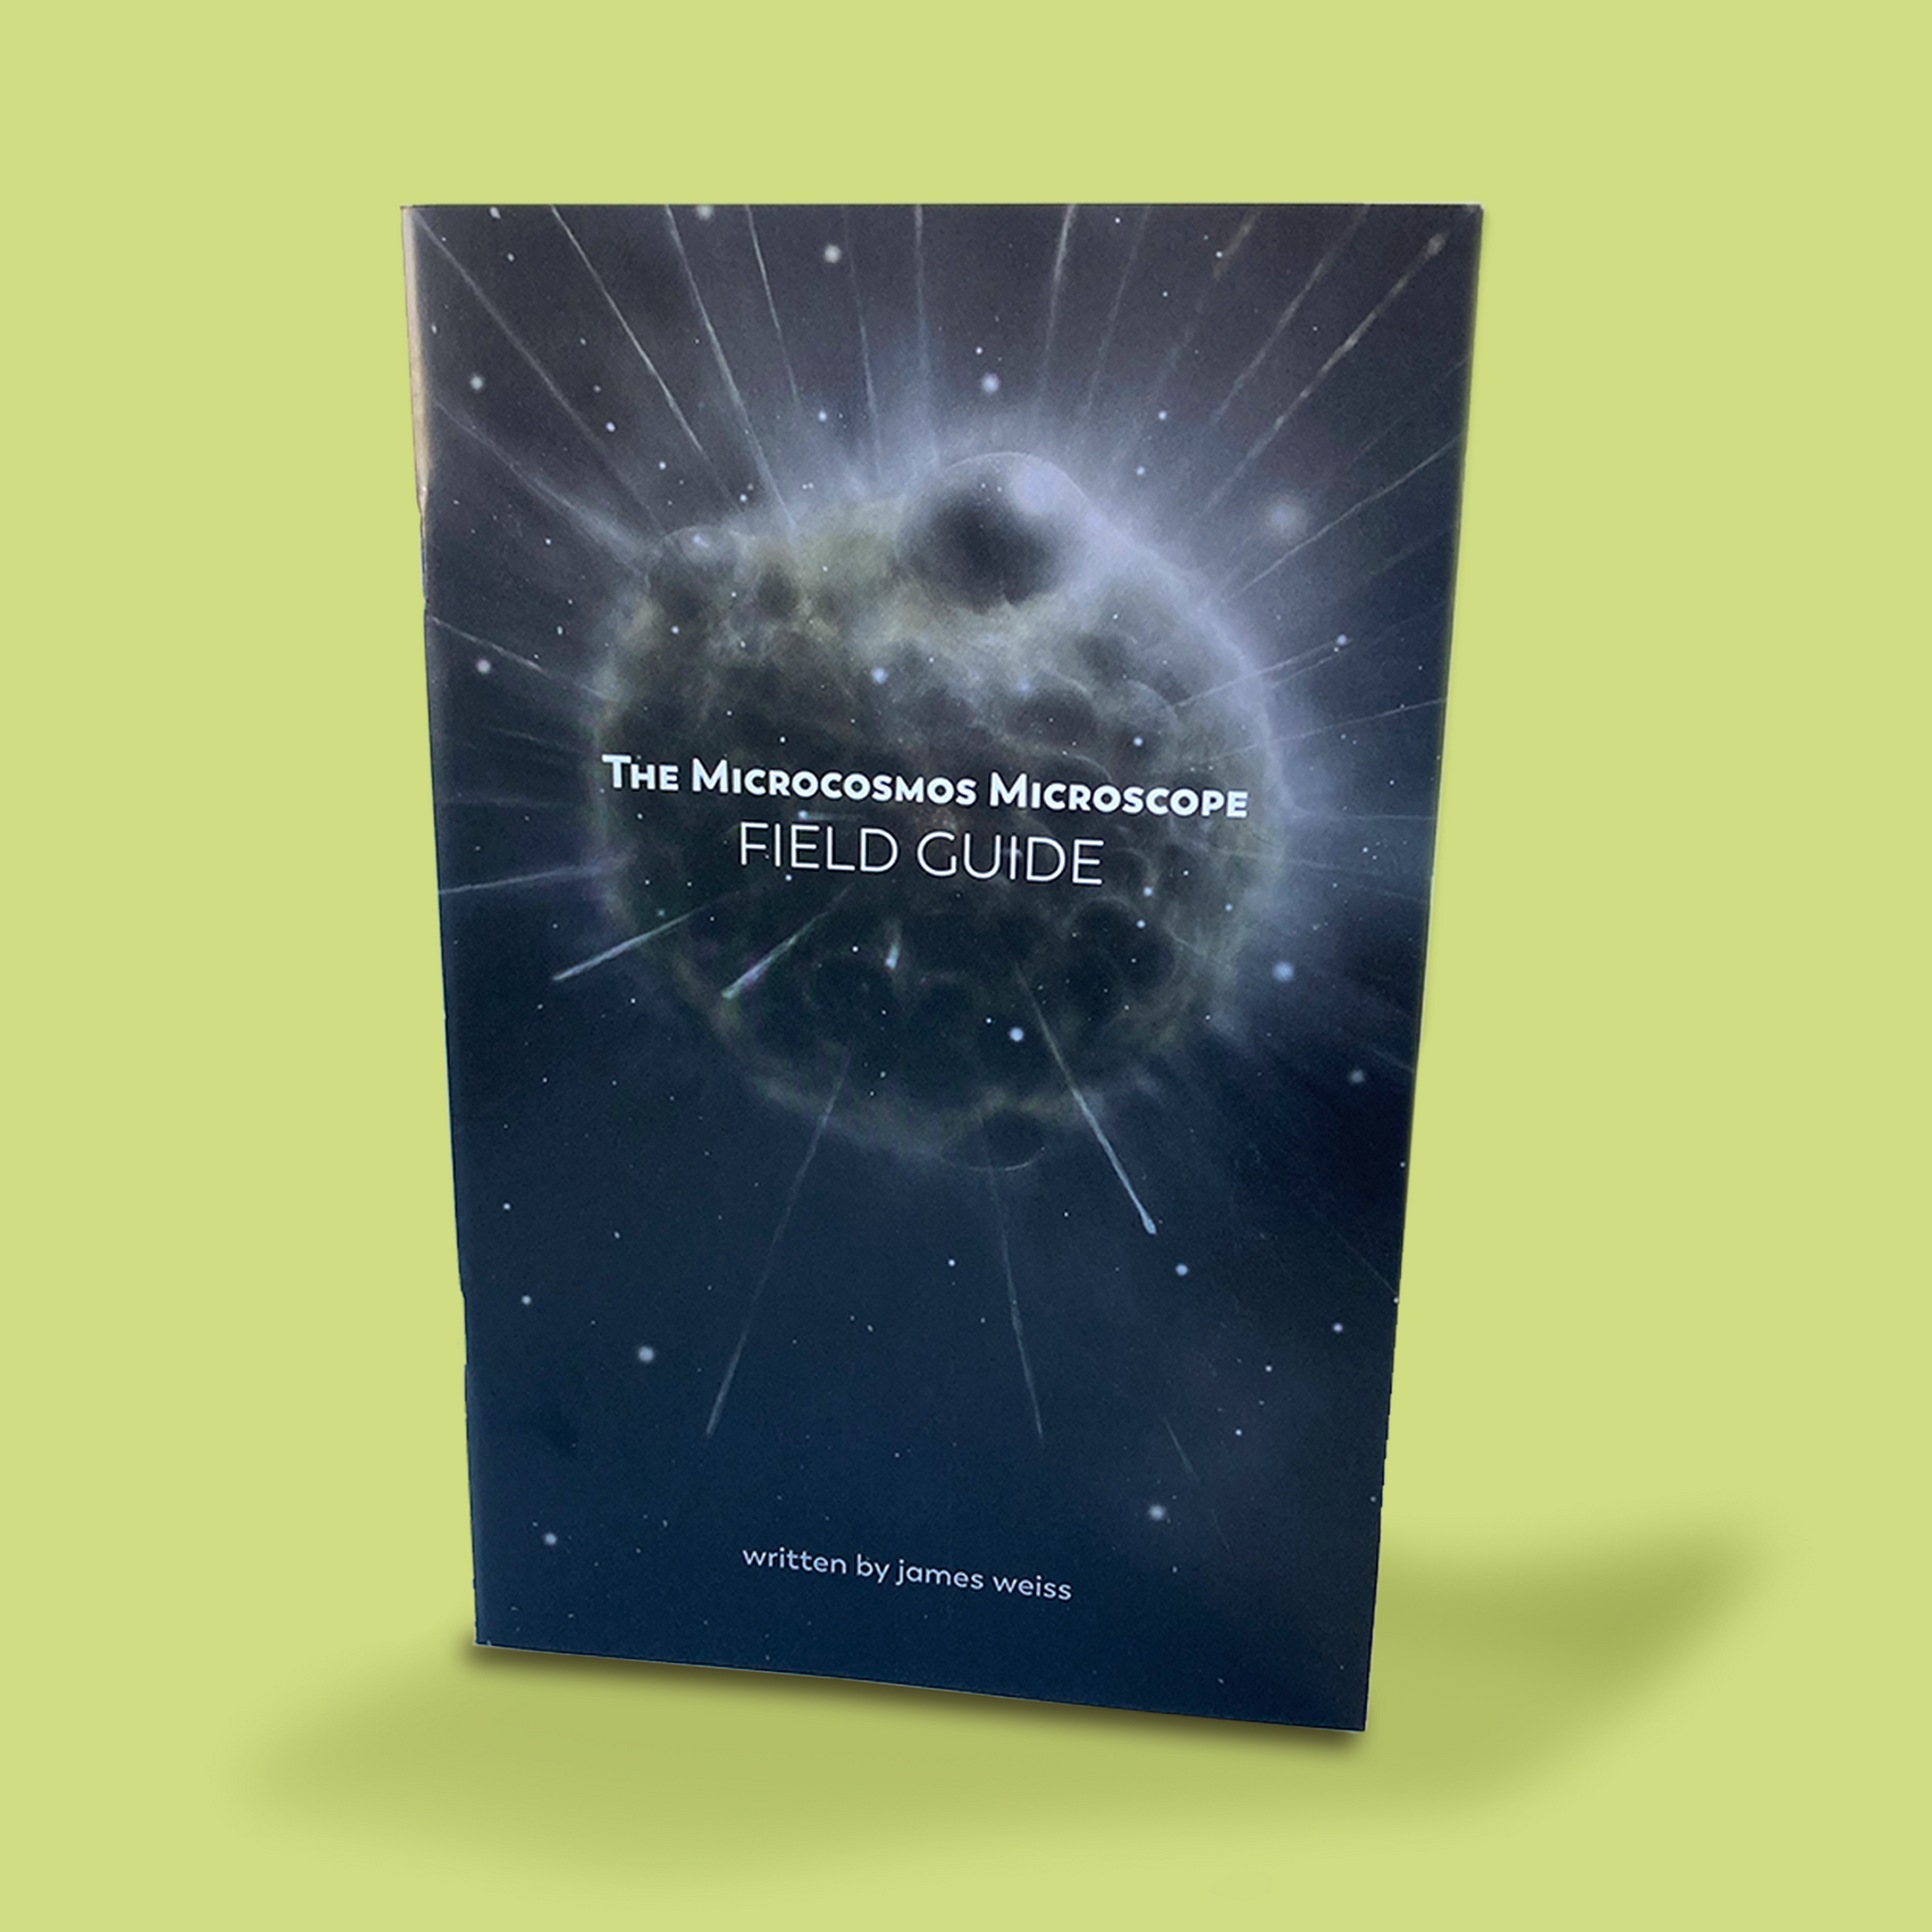 Photograph of book featuring the words "The Microcosmos Microscope Field Guide, written by James Weiss" on the cover